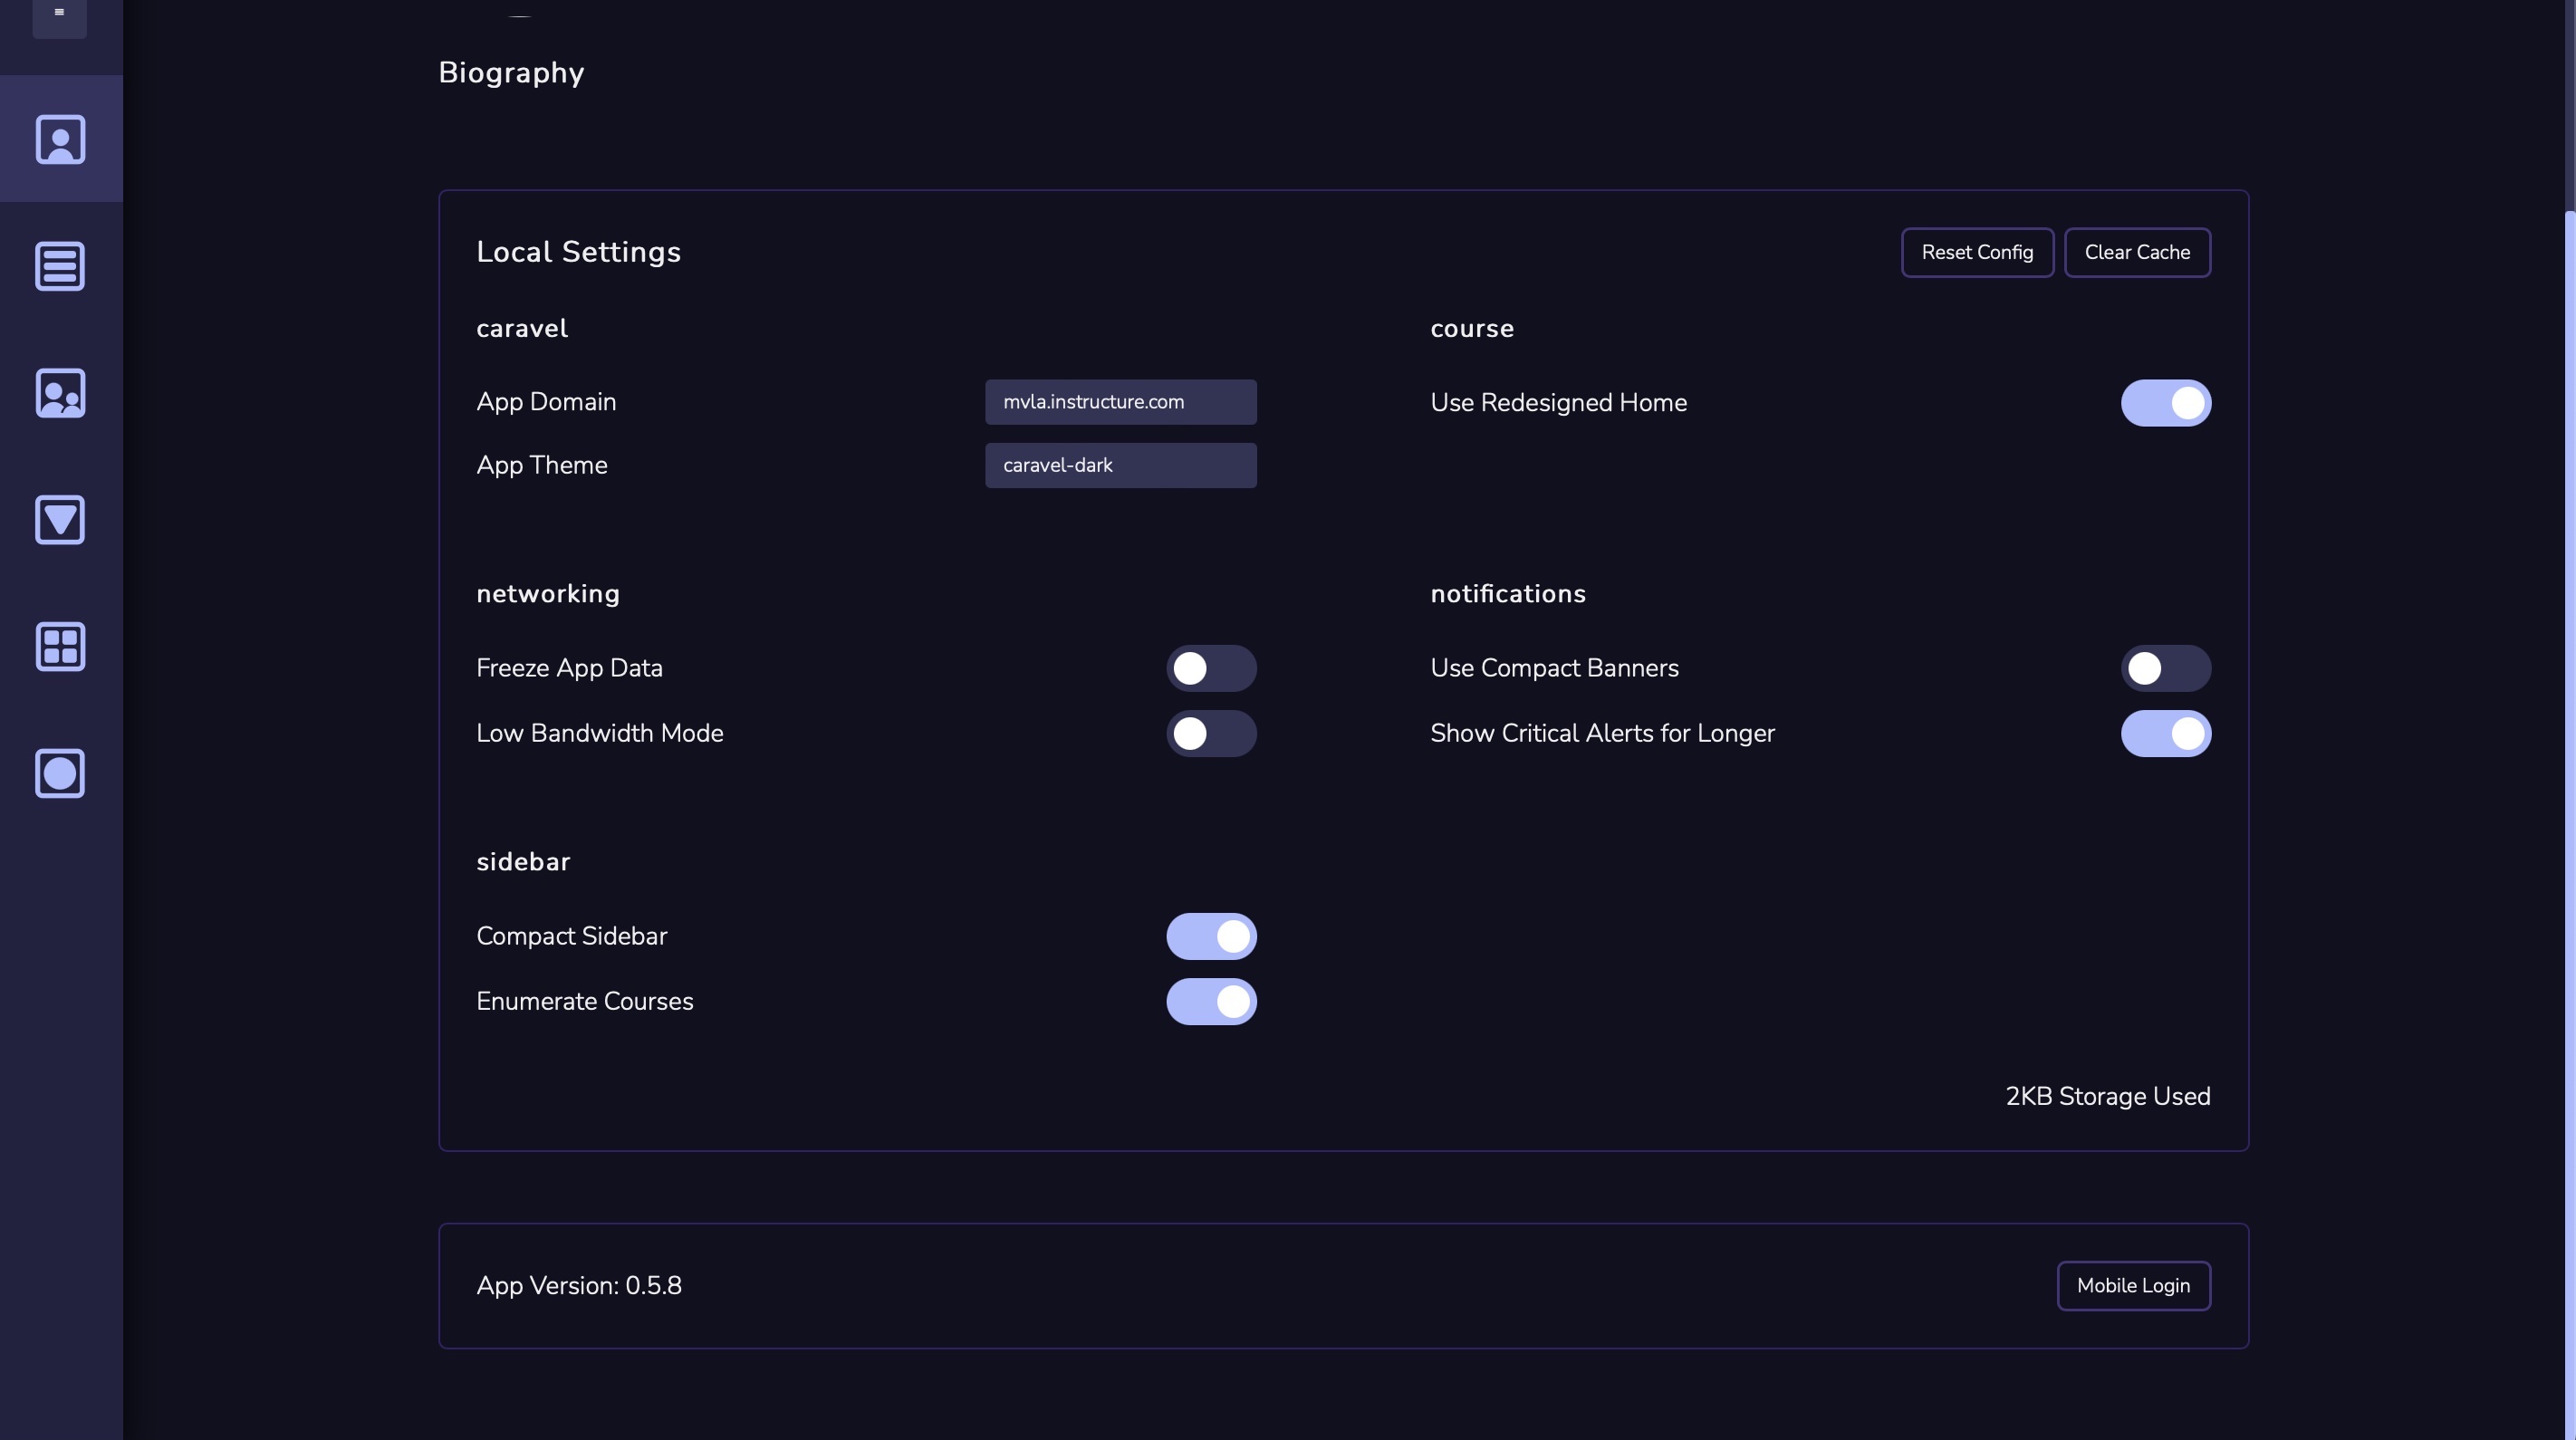 Caravel settings page - different theme